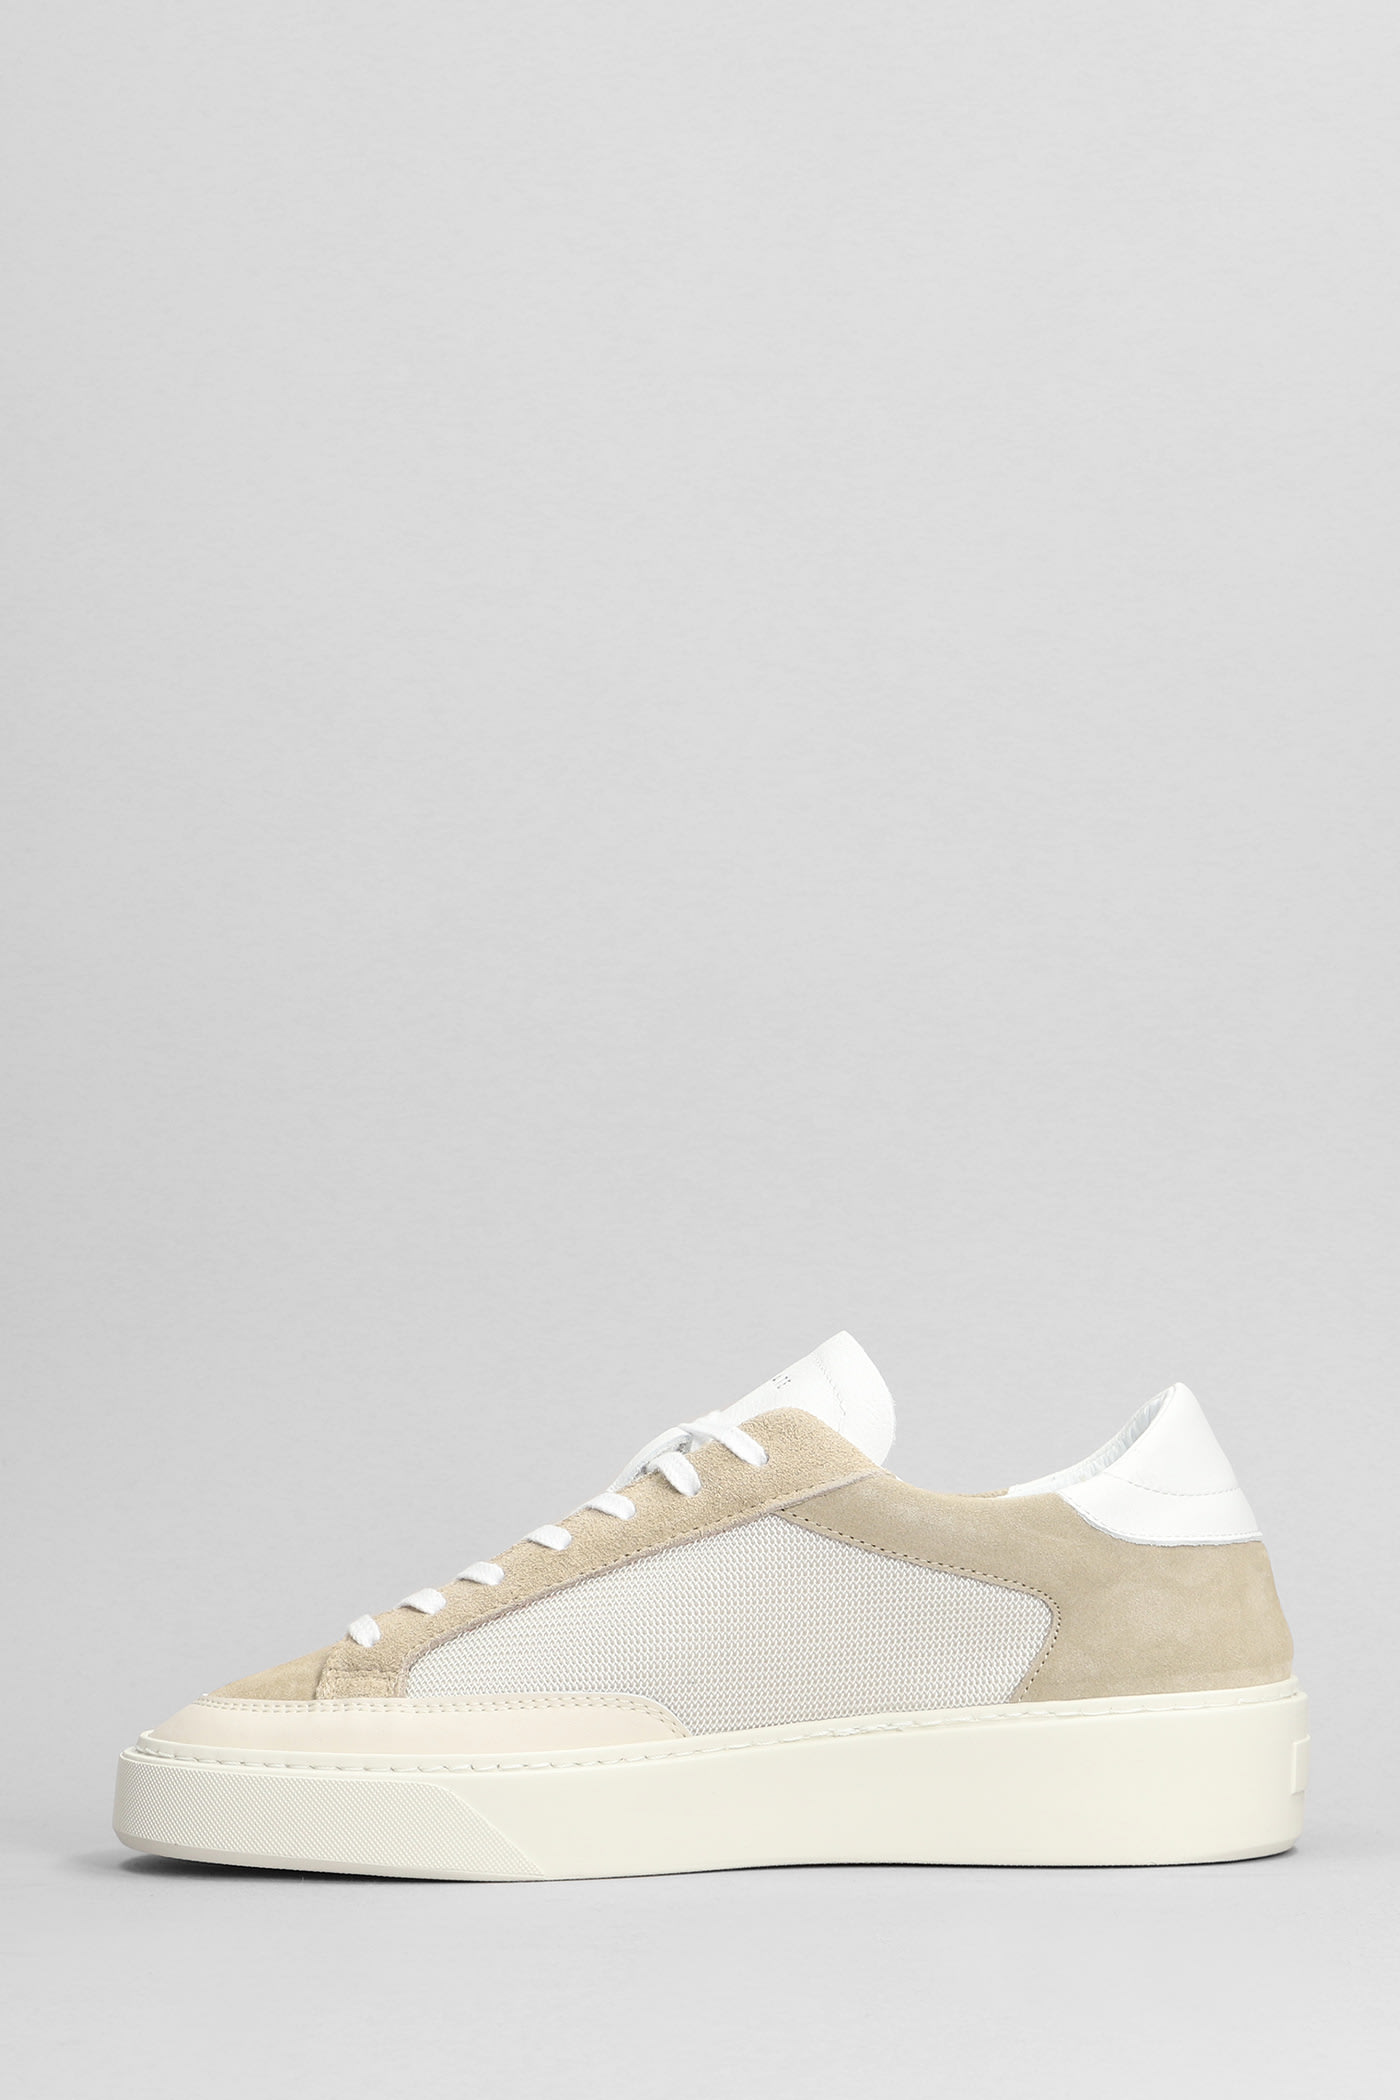 Shop Date Levante Dragon Sneakers In Beige Suede And Fabric